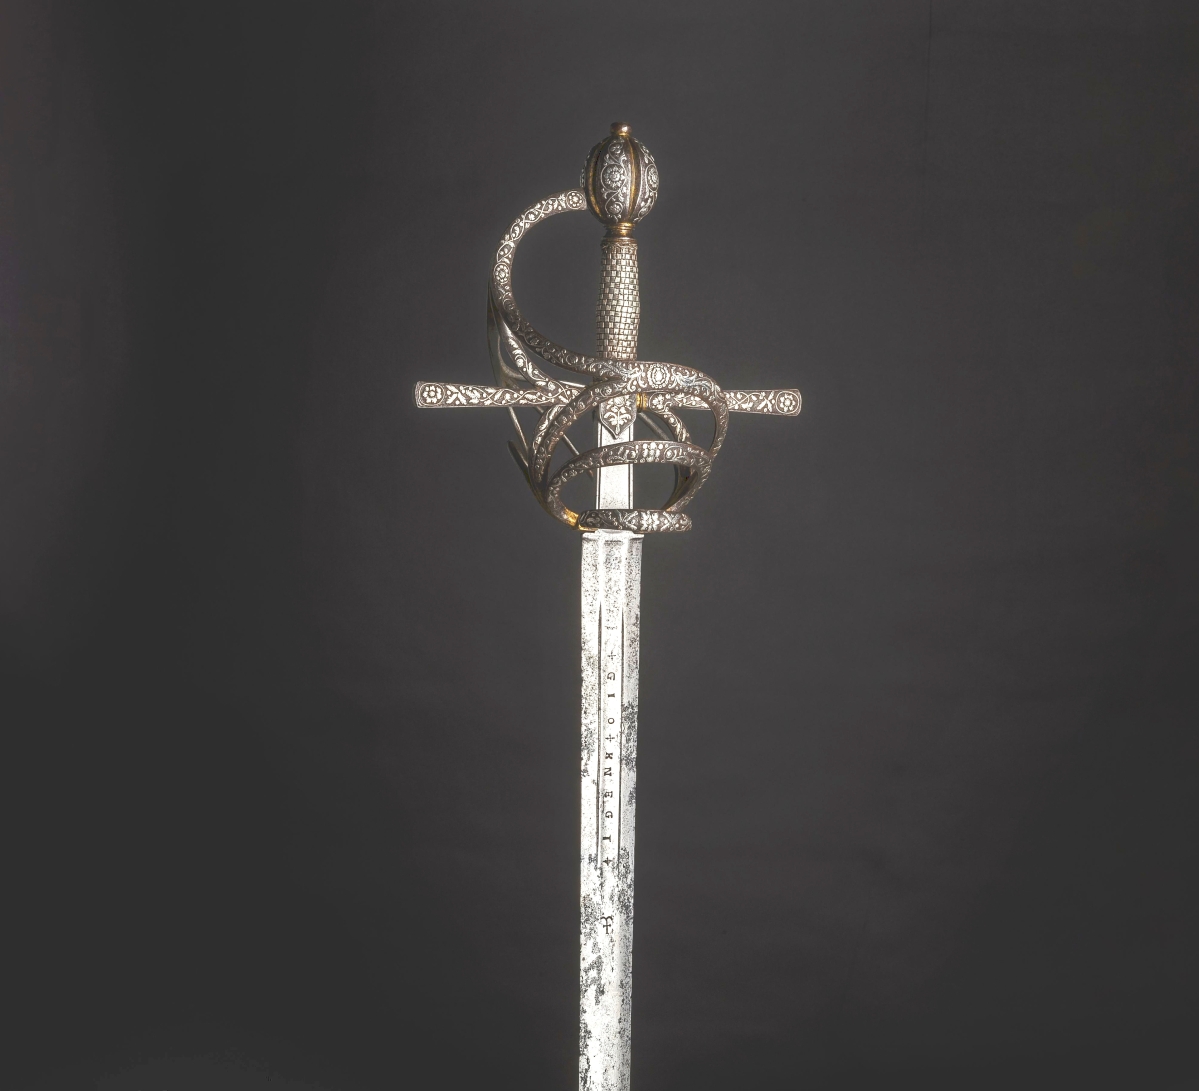 The most significant lot in the May 27 antique arms and armor sale was this German rapier from around 1610 with damascened and gilded silver hilt, which is comparable to the Wallace Collection and Dreger Collection examples at Berlin.  It sold for $ 53,351.